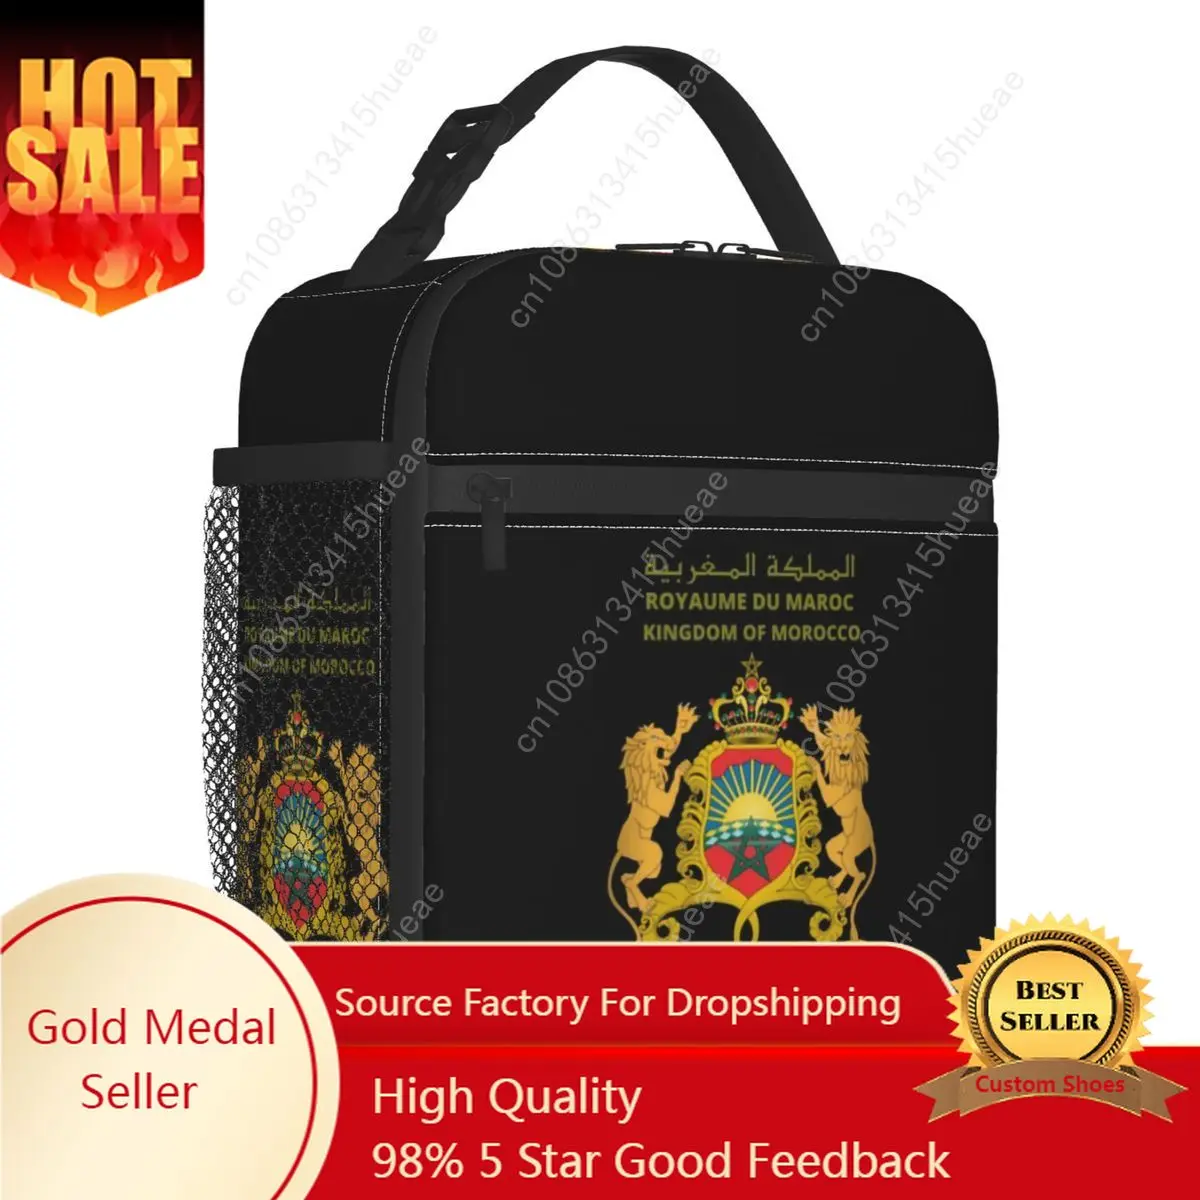 

Moroccan Passport Kingdom Of Morocco Insulated Lunch Bag for Women Resuable Thermal Cooler Bento Box Office Work School